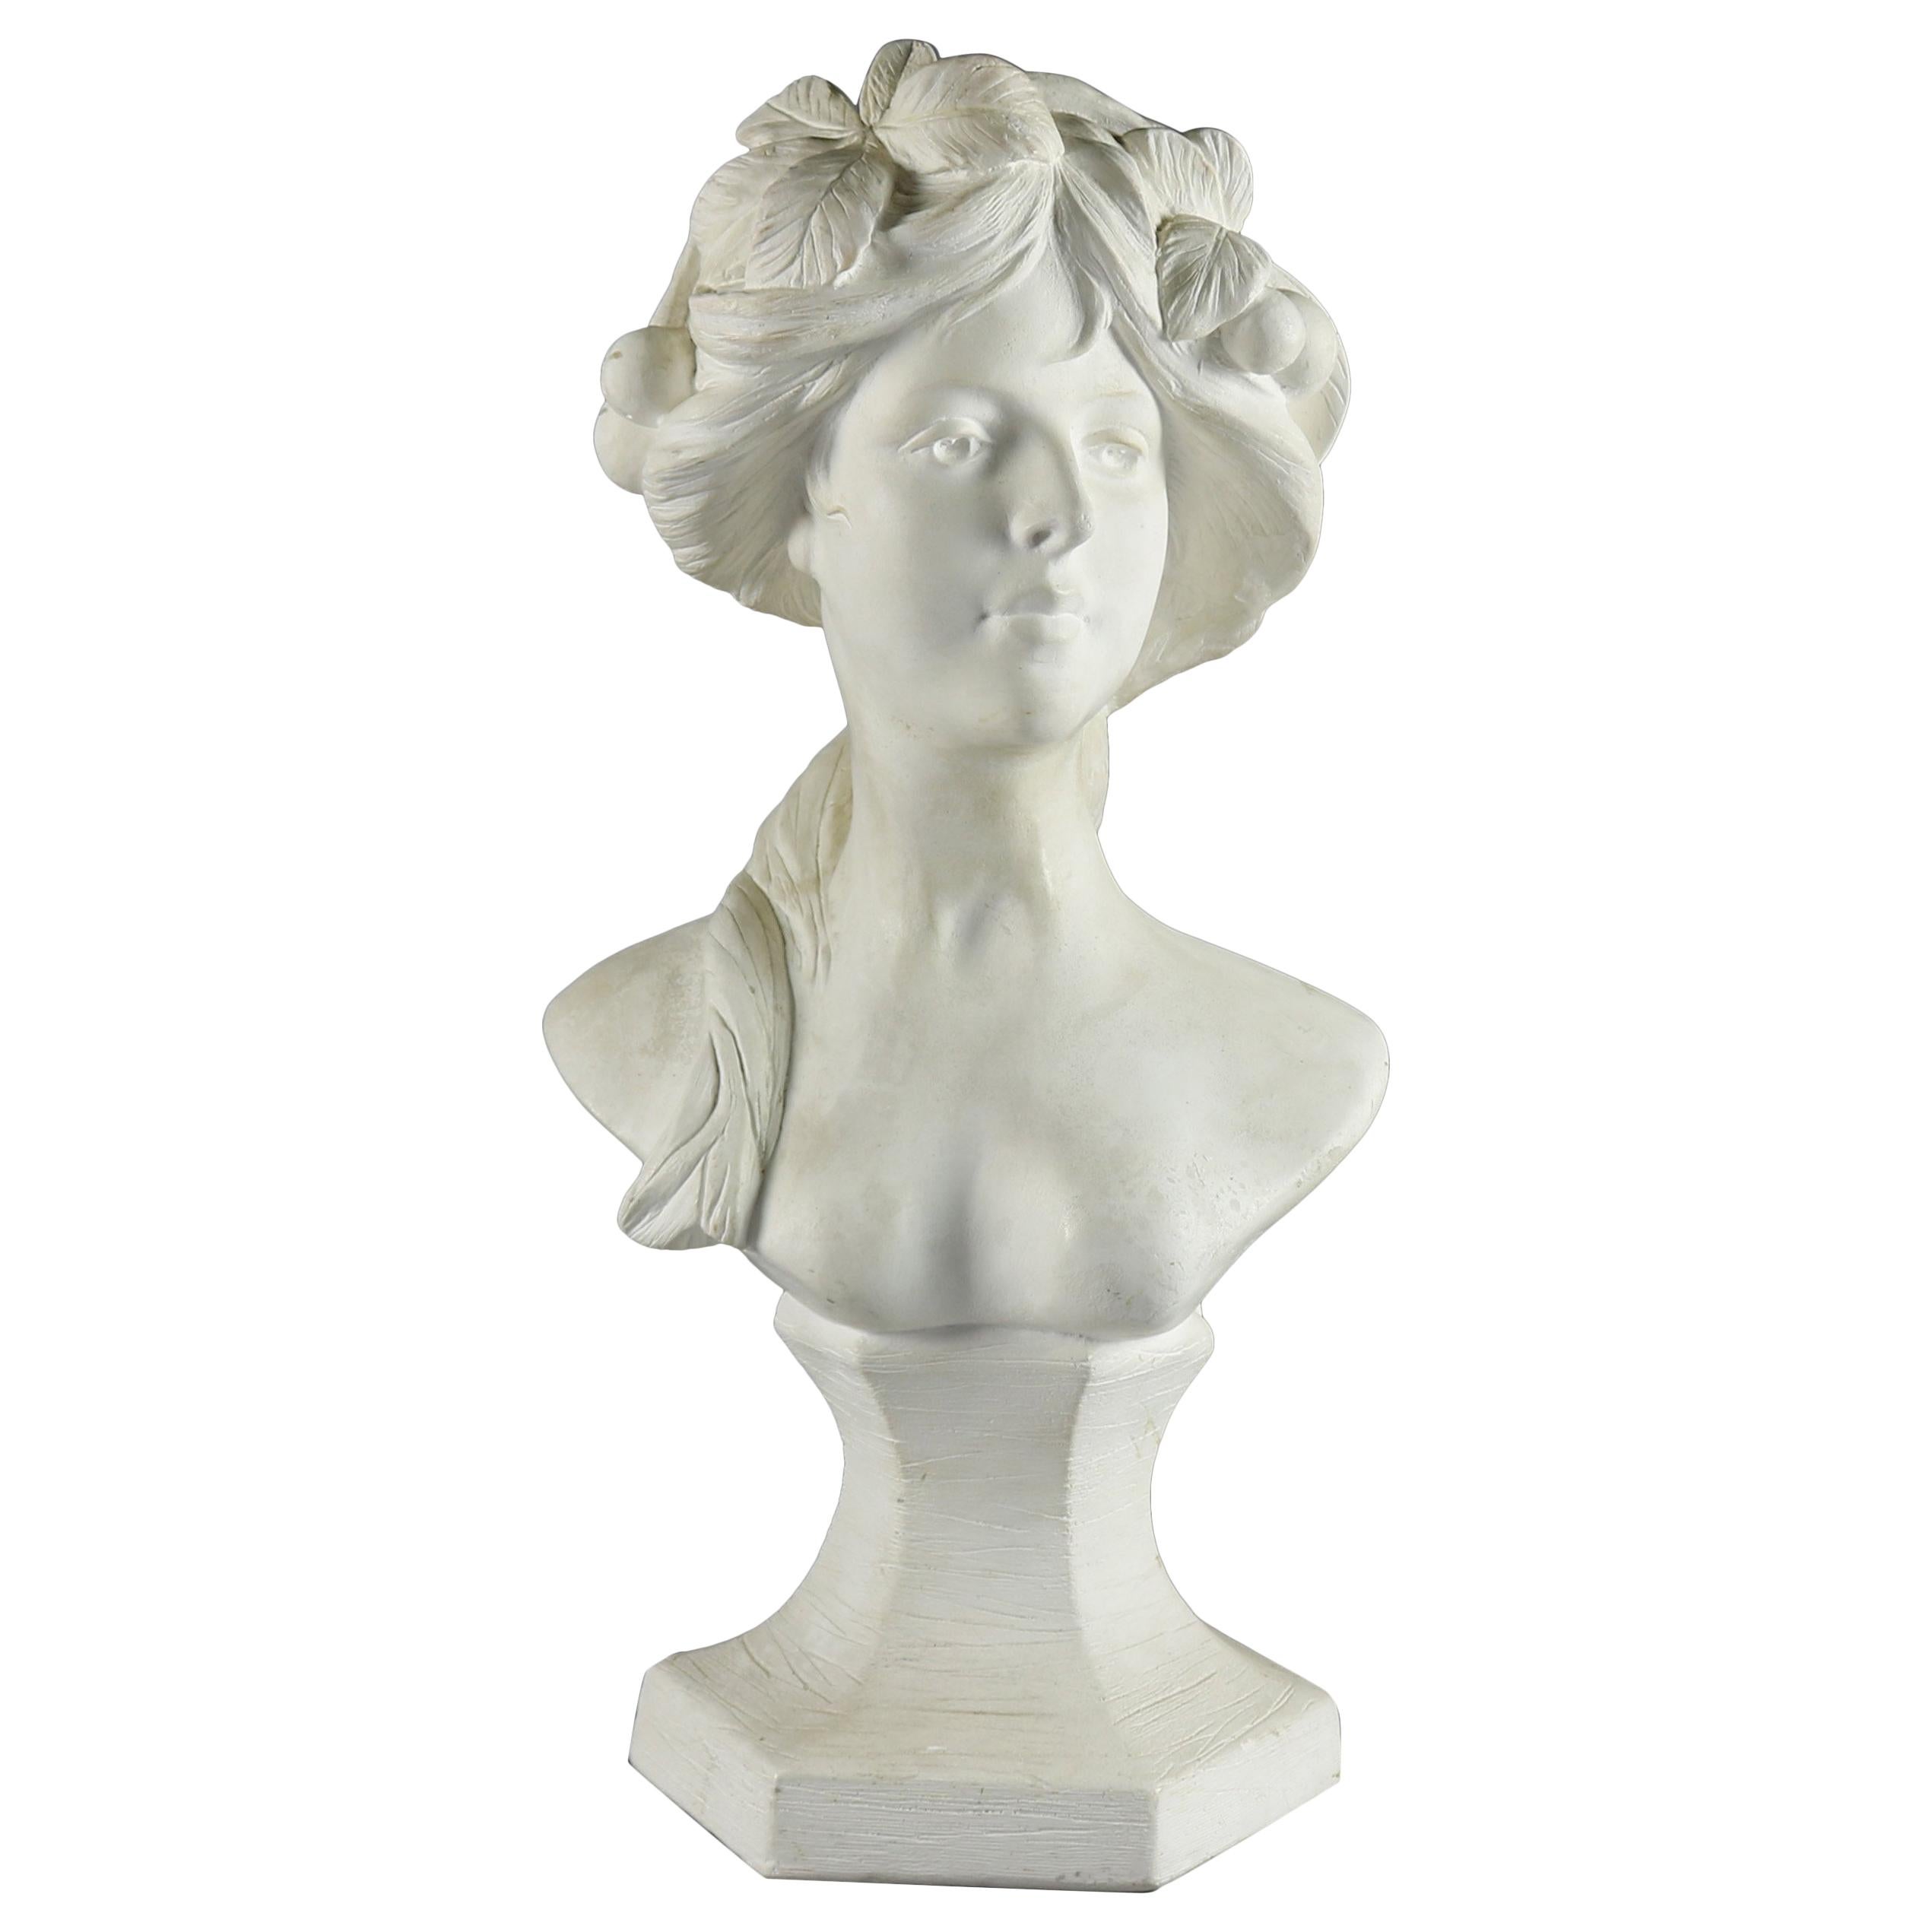 Bust of Woman Art Nouveau Sculpture 22, Bust Head and Shoulders of